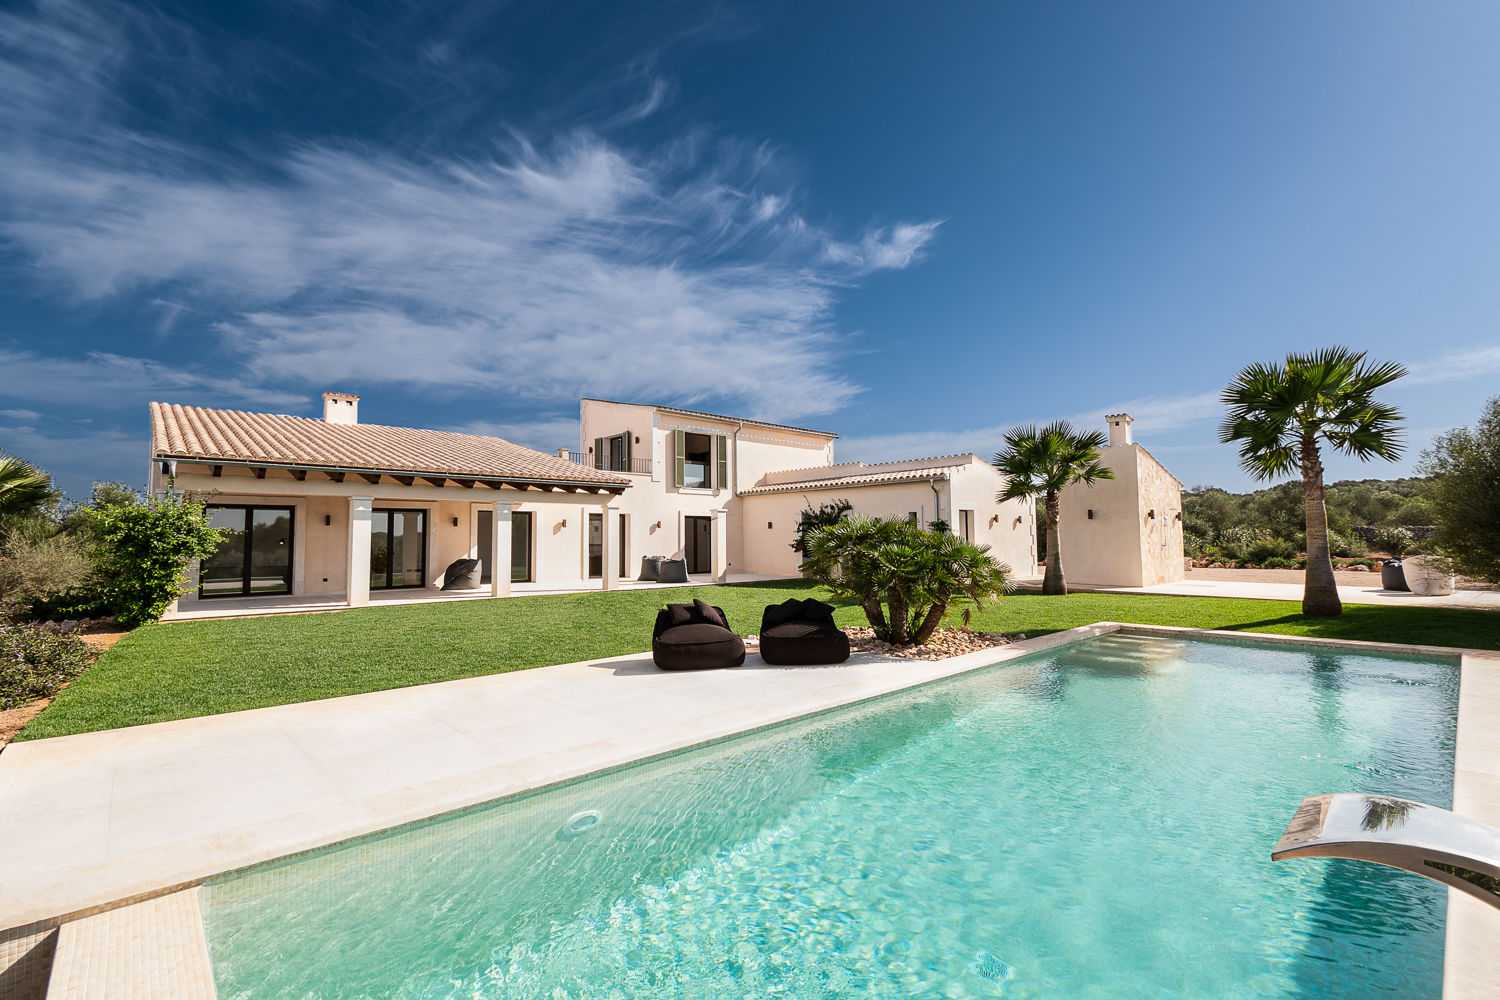 New-build finca with Mediterranean flair in Ses Salines